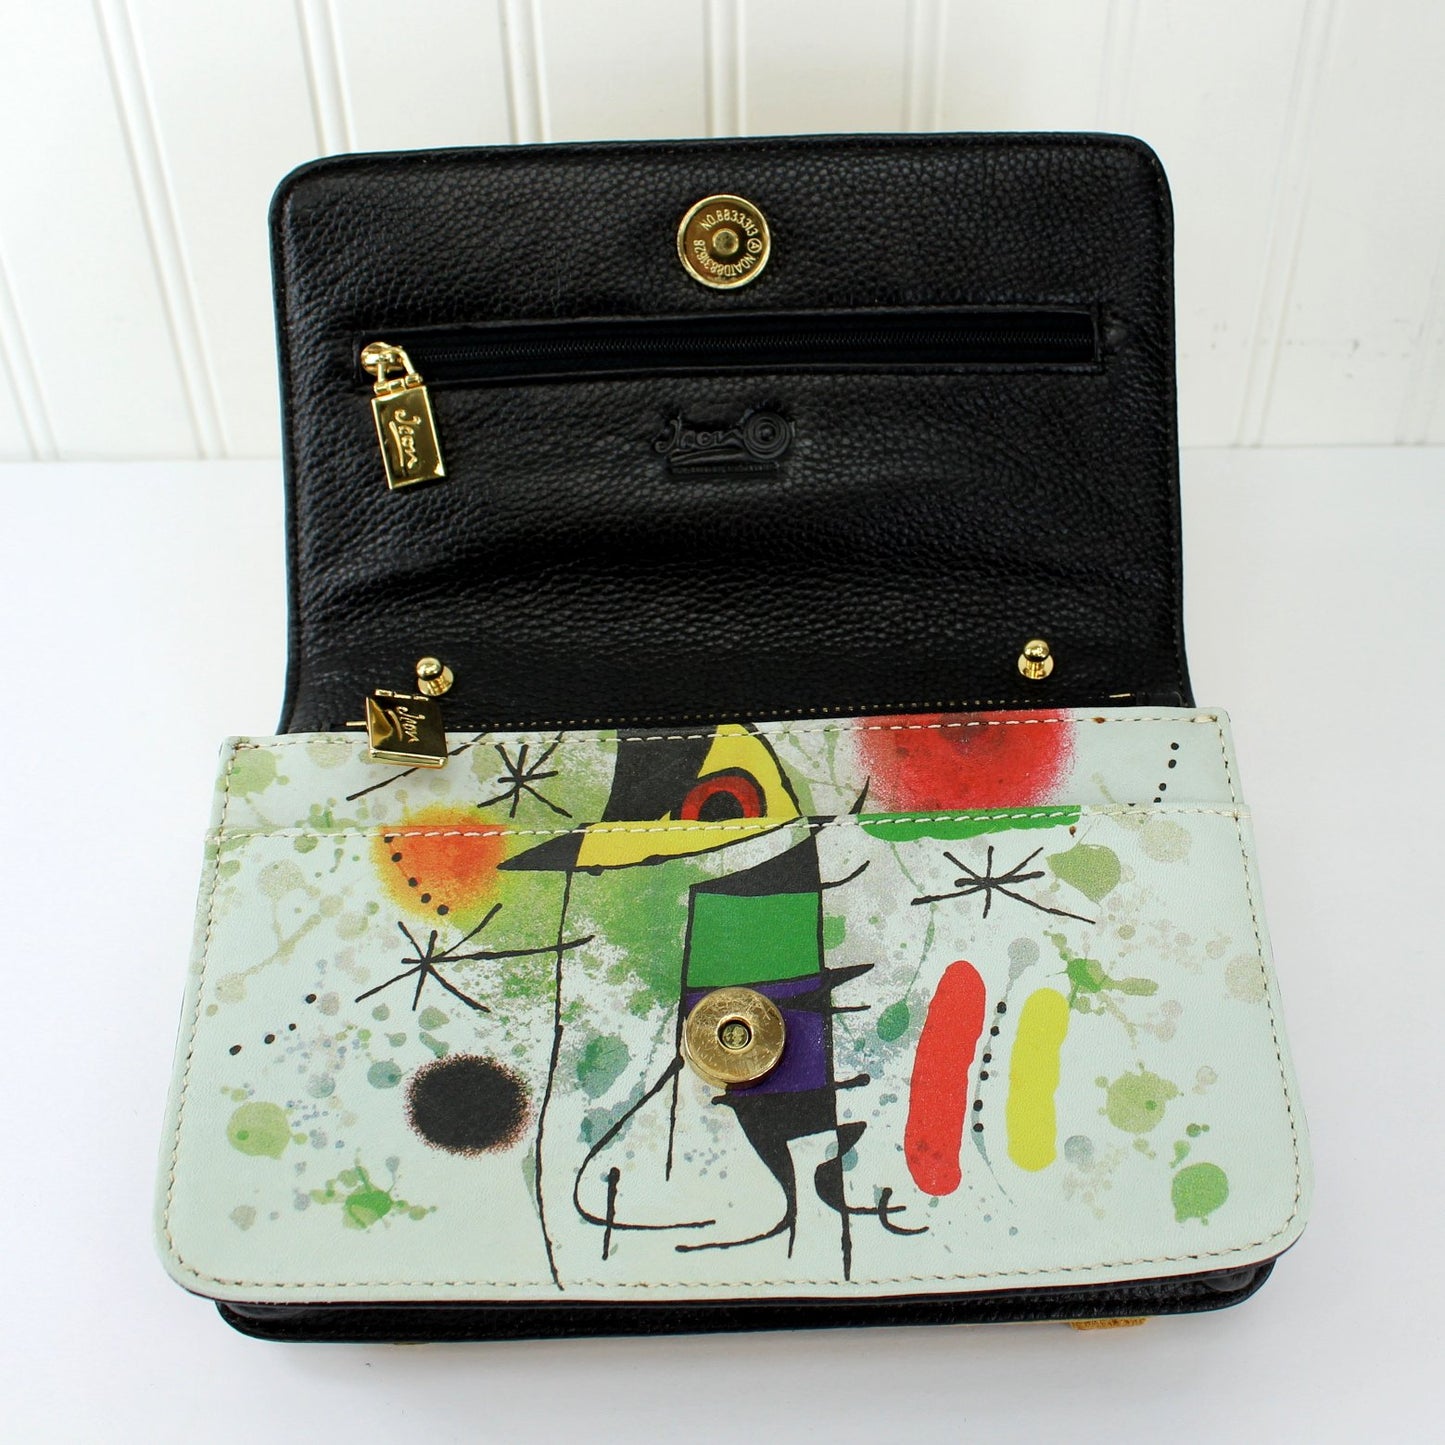 Icon Los Angeles Clutch Purse Miro Singing Fish Design New Unused view of bautiful leather and detail of bag